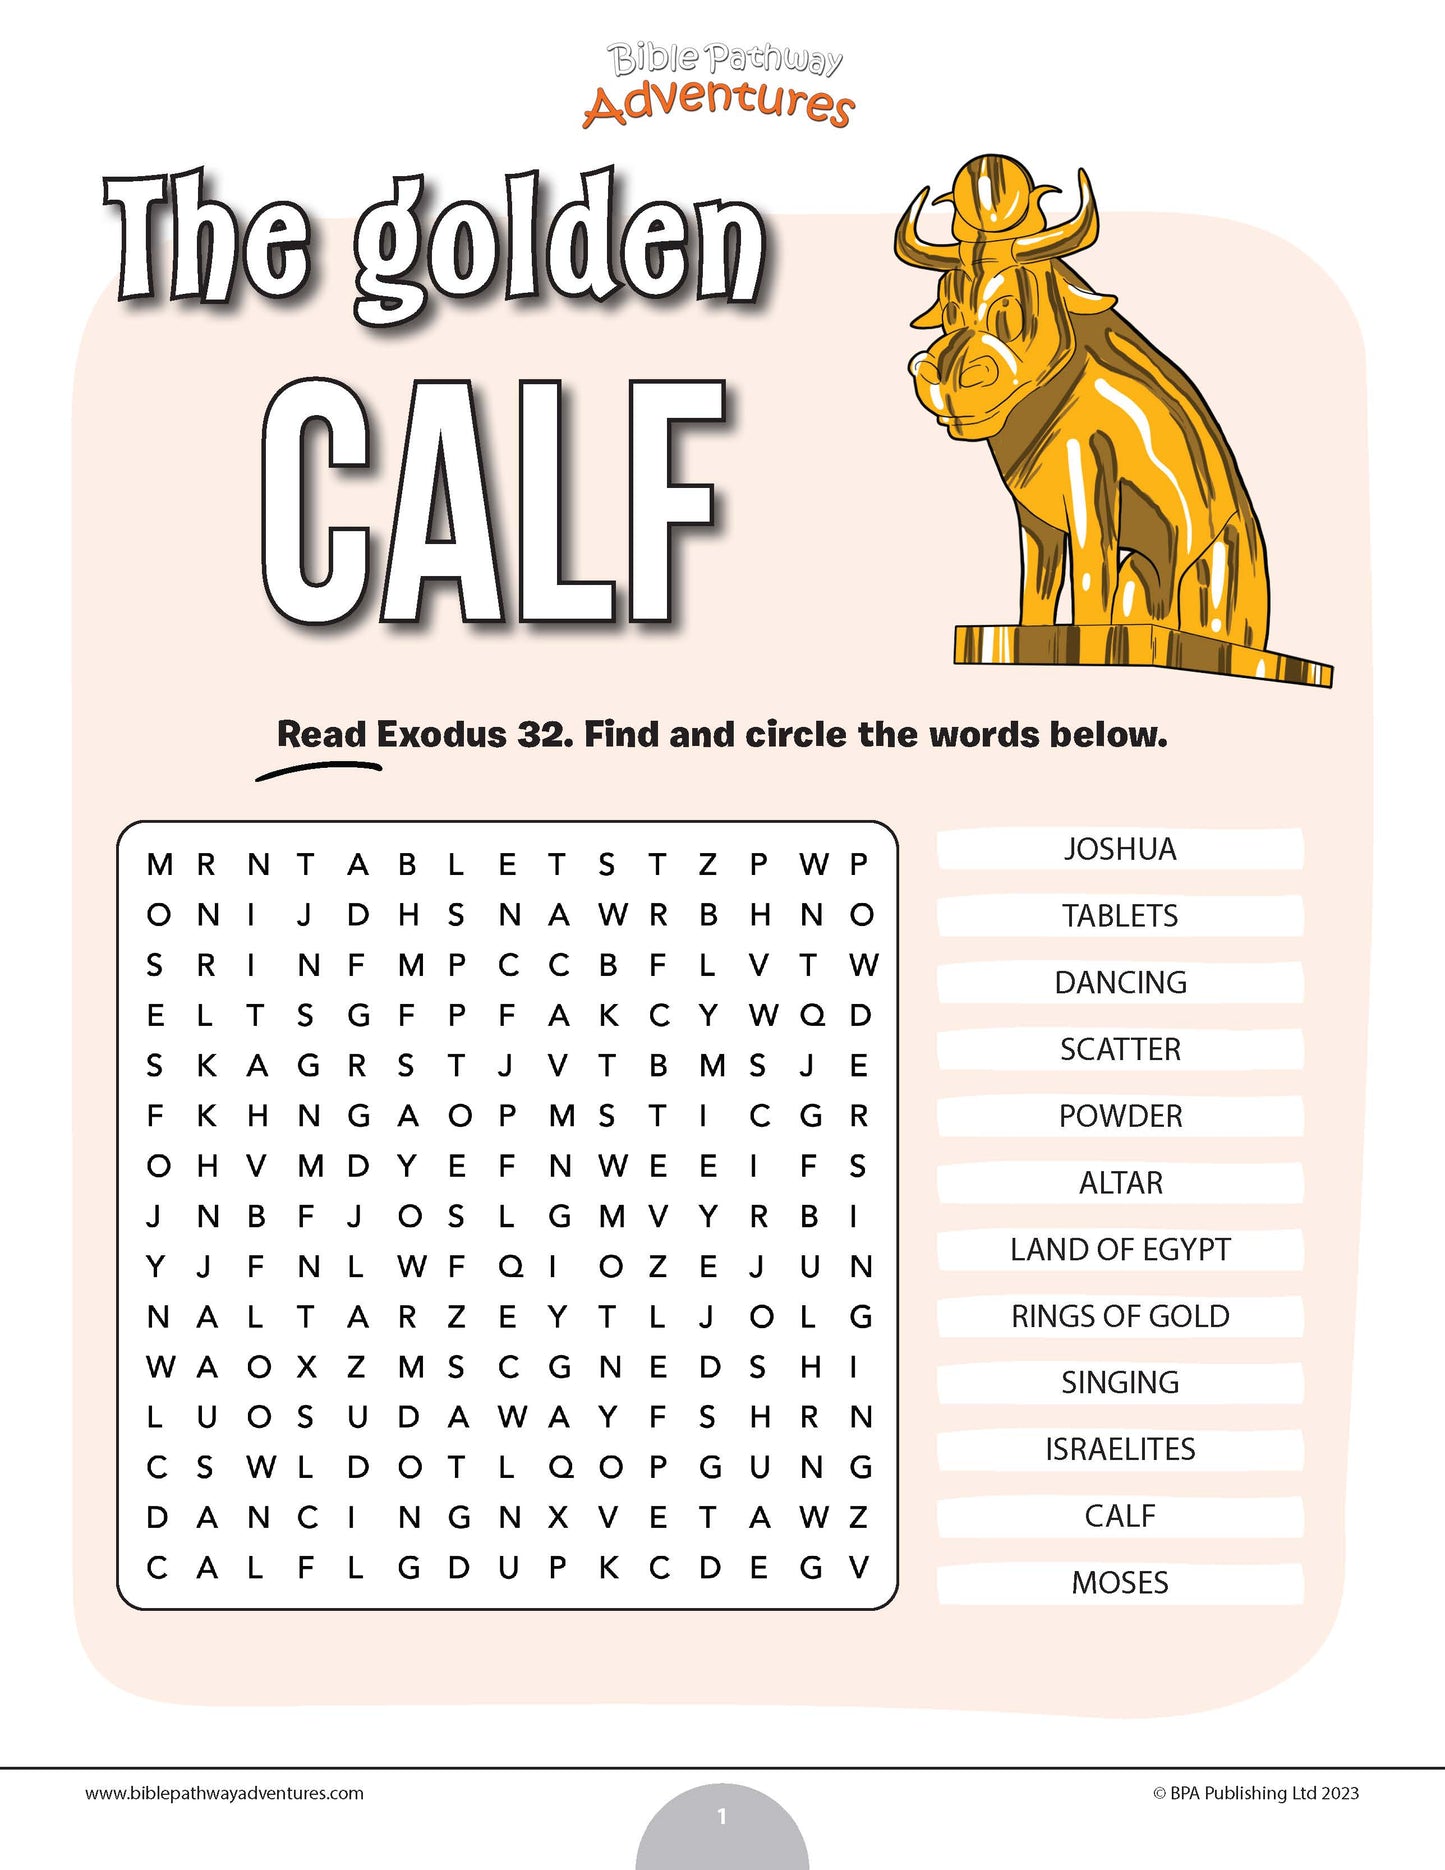 The Golden Calf word search